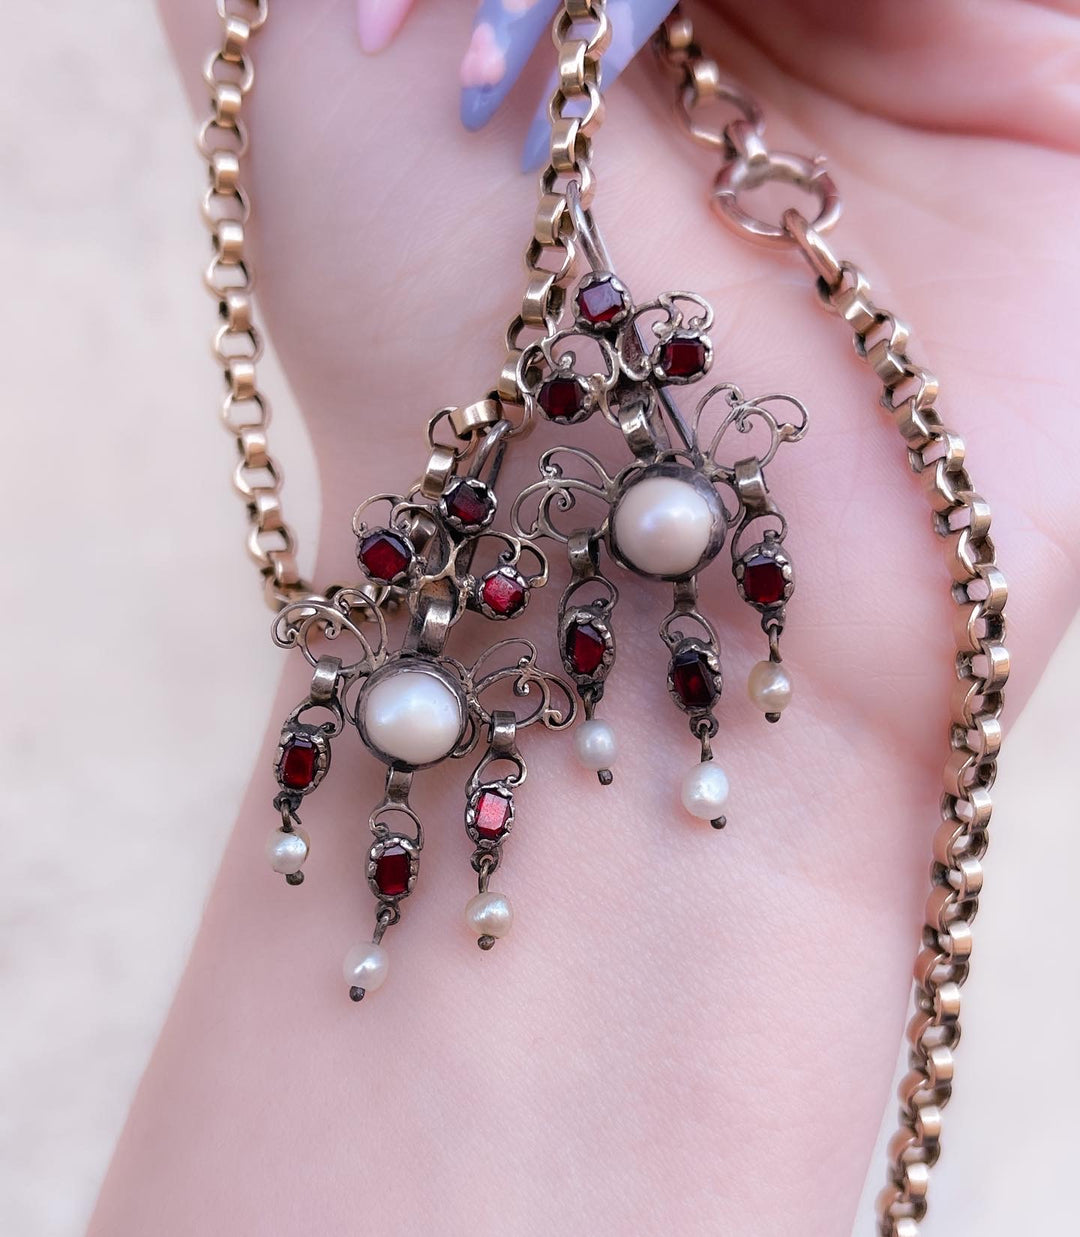 Original 18th Century French Pearl and Garnet Earrings in Sterling Silver